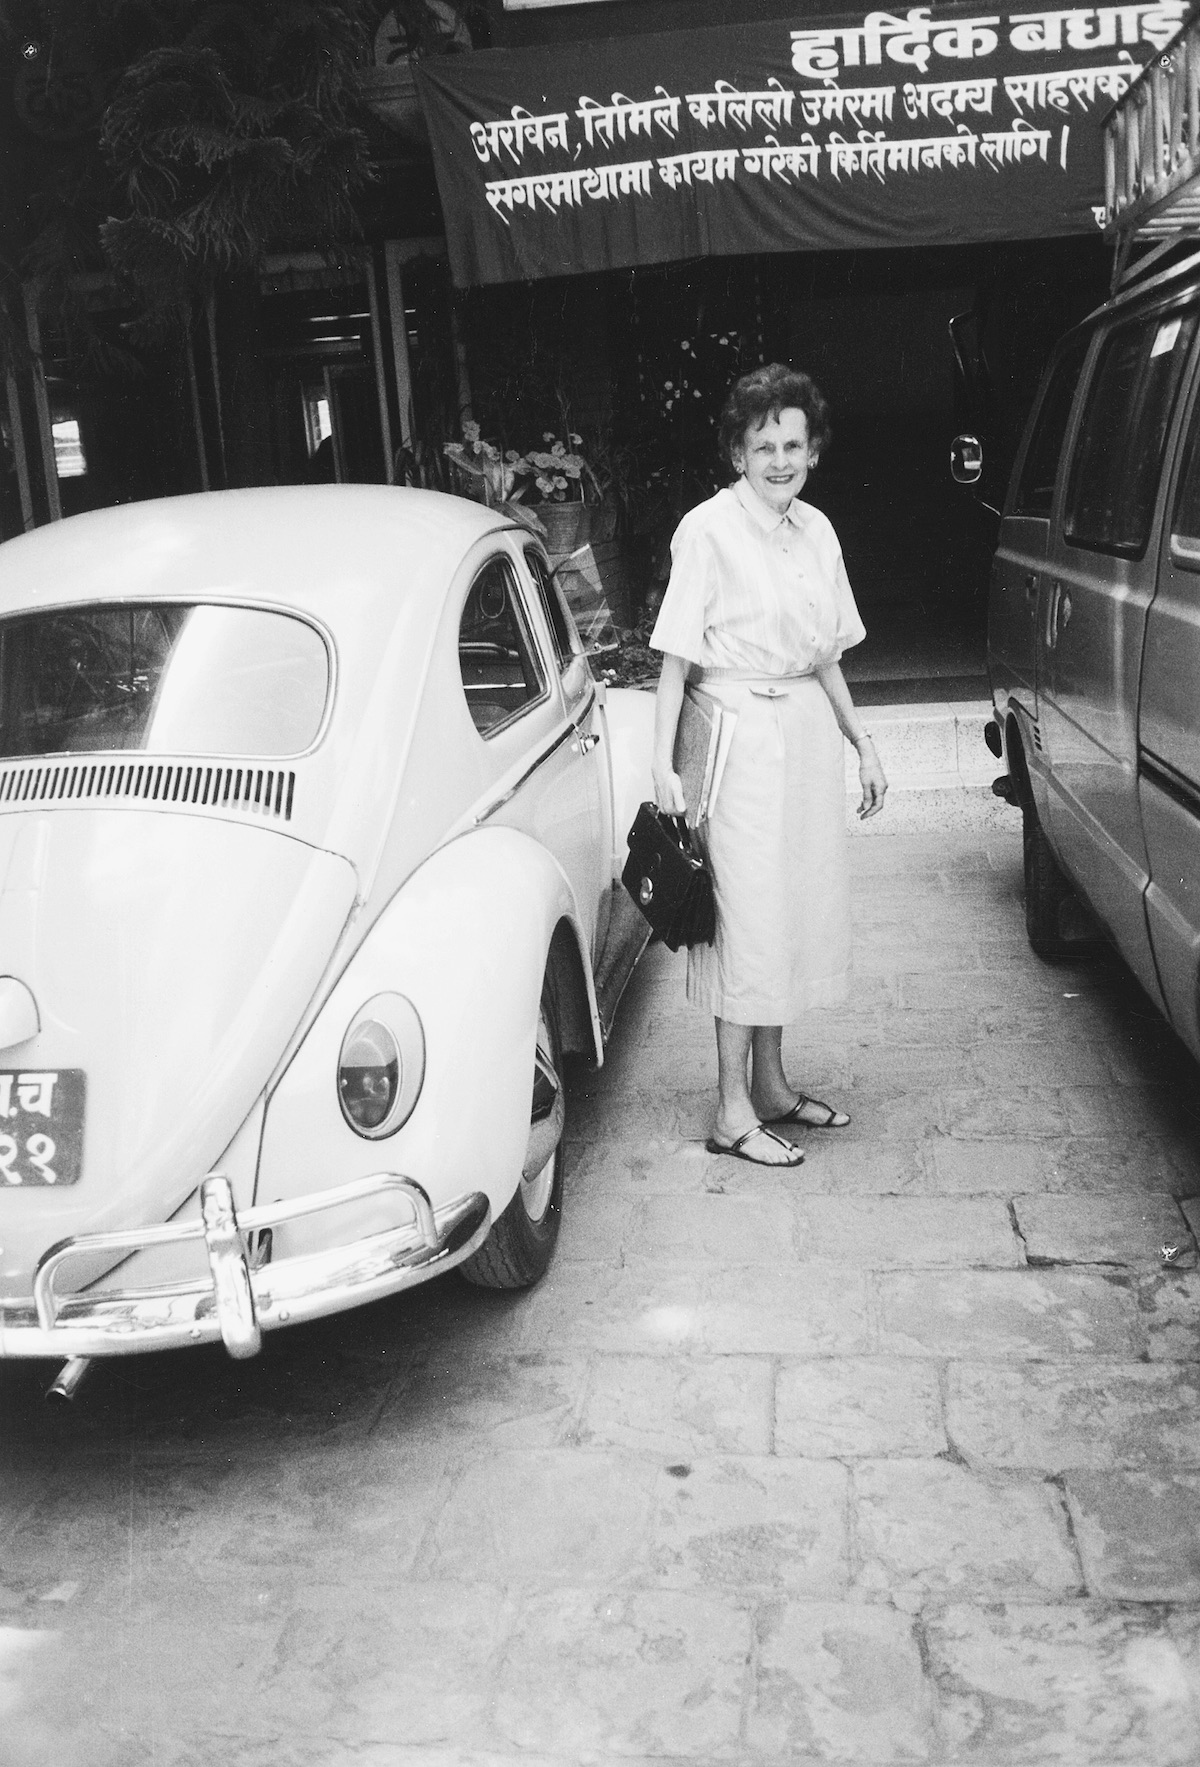 Hawley was known for her Volkswagen Beetle. [Photo] Courtesy of the Michael and Meg Leonard collection